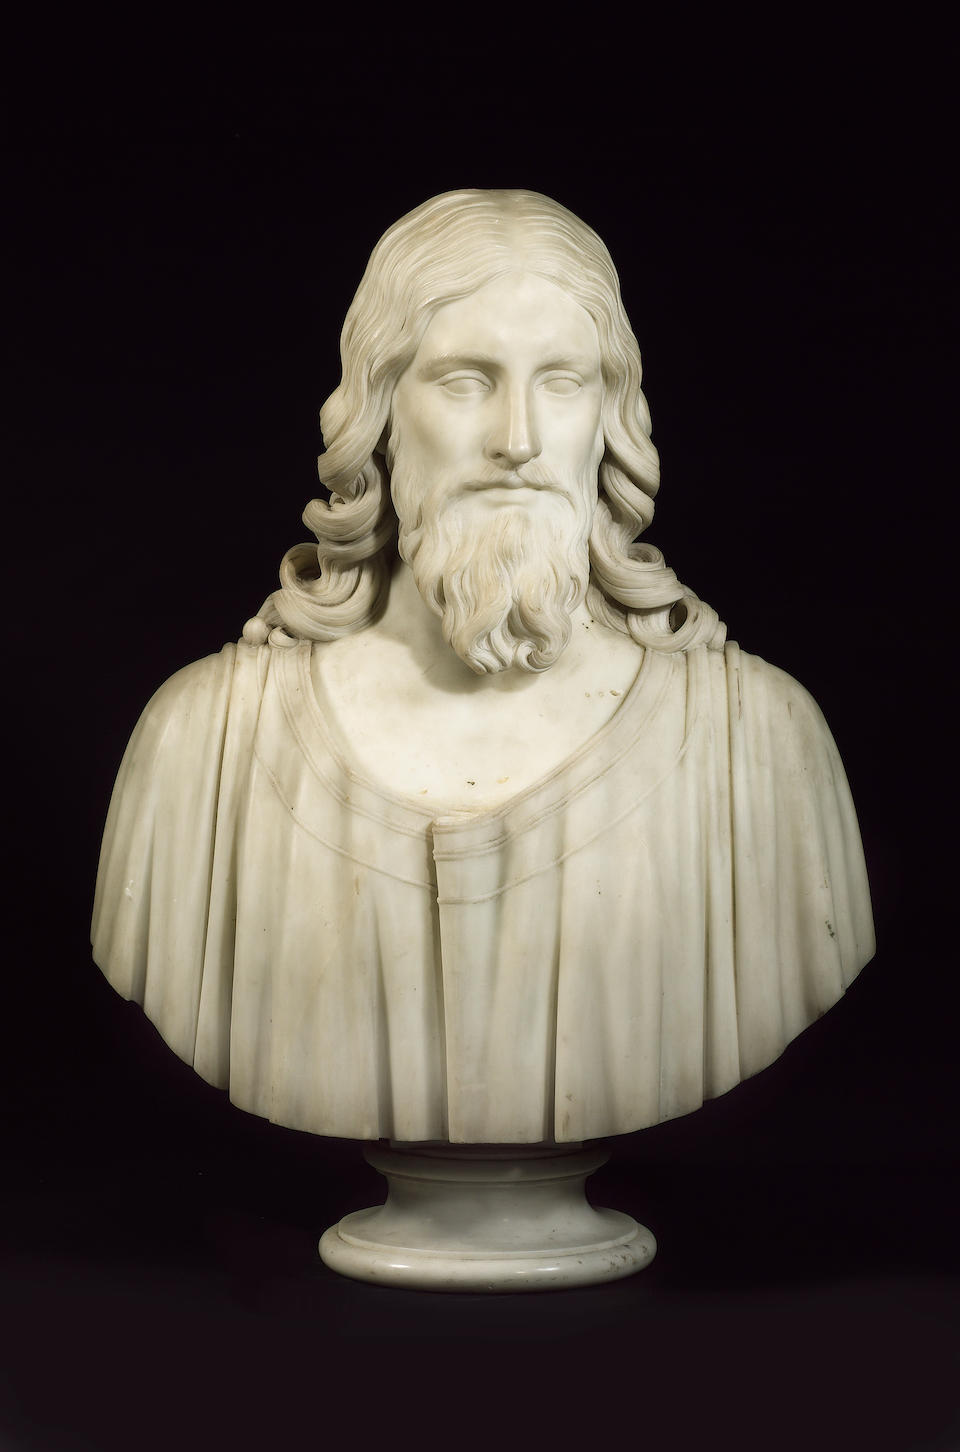 Hiram Powers (American, 1805-1873): A sculpted white marble Bust of Christ